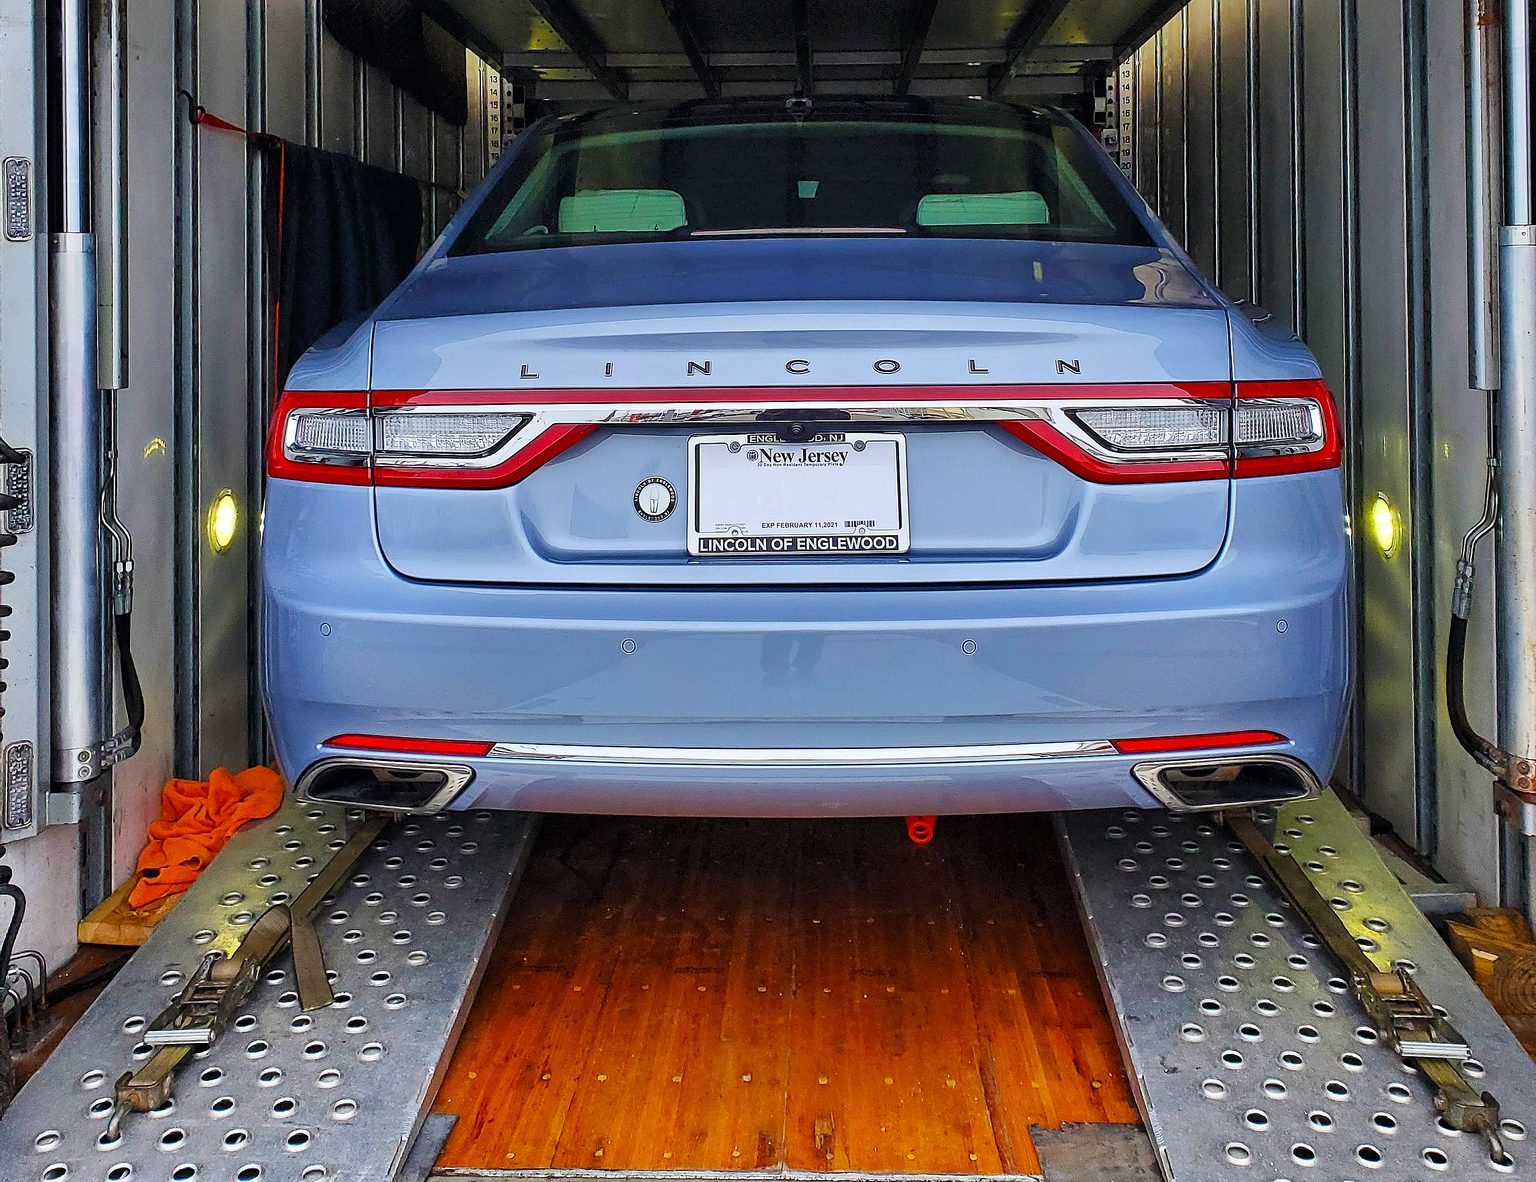 The Best Car Shipping Company for Your Needs: How to Select One